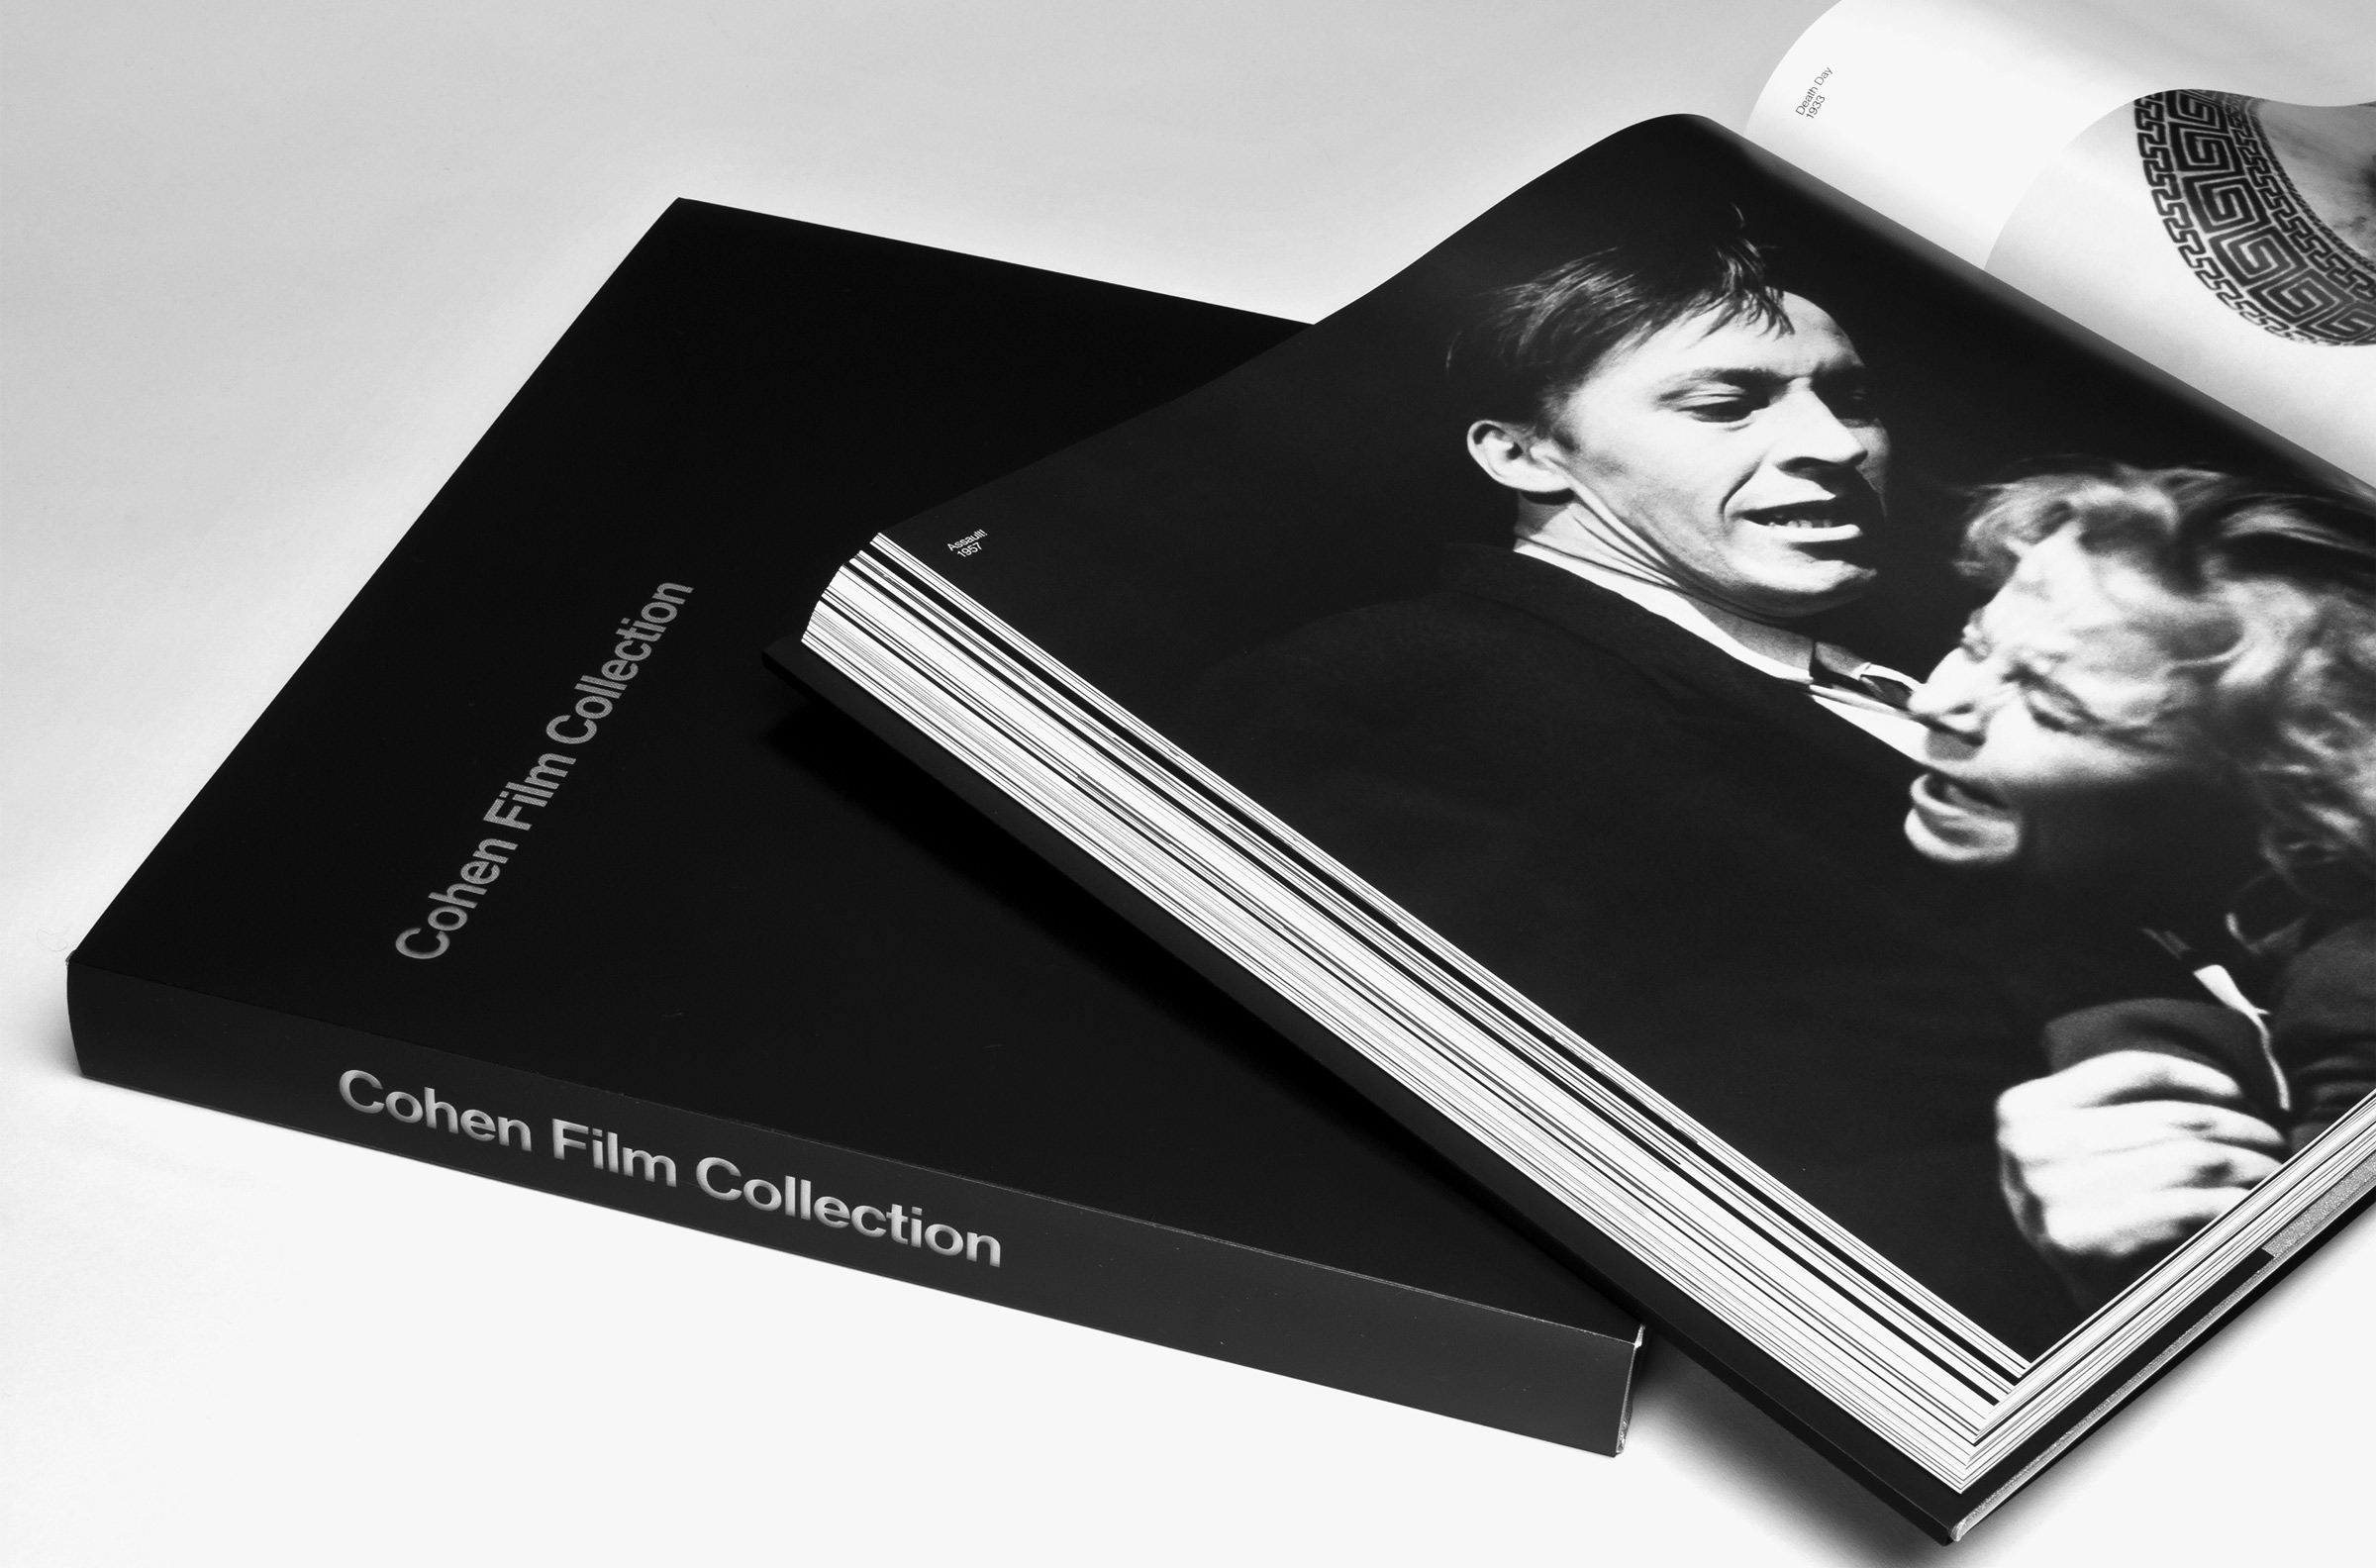 Book for Cohen Film Collection.